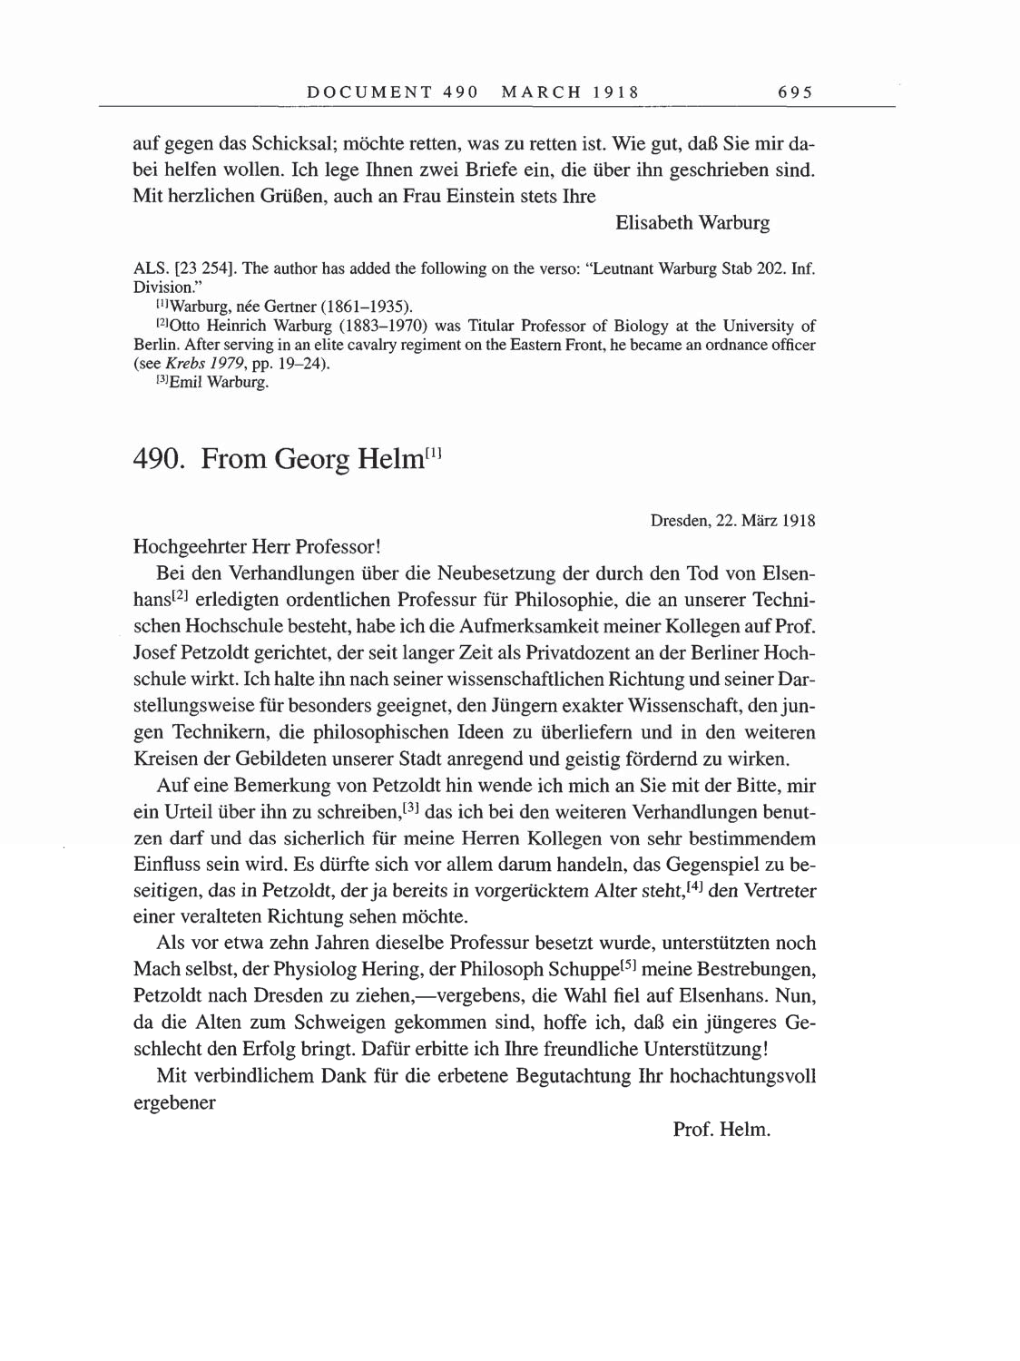 Volume 8, Part B: The Berlin Years: Correspondence 1918 page 695